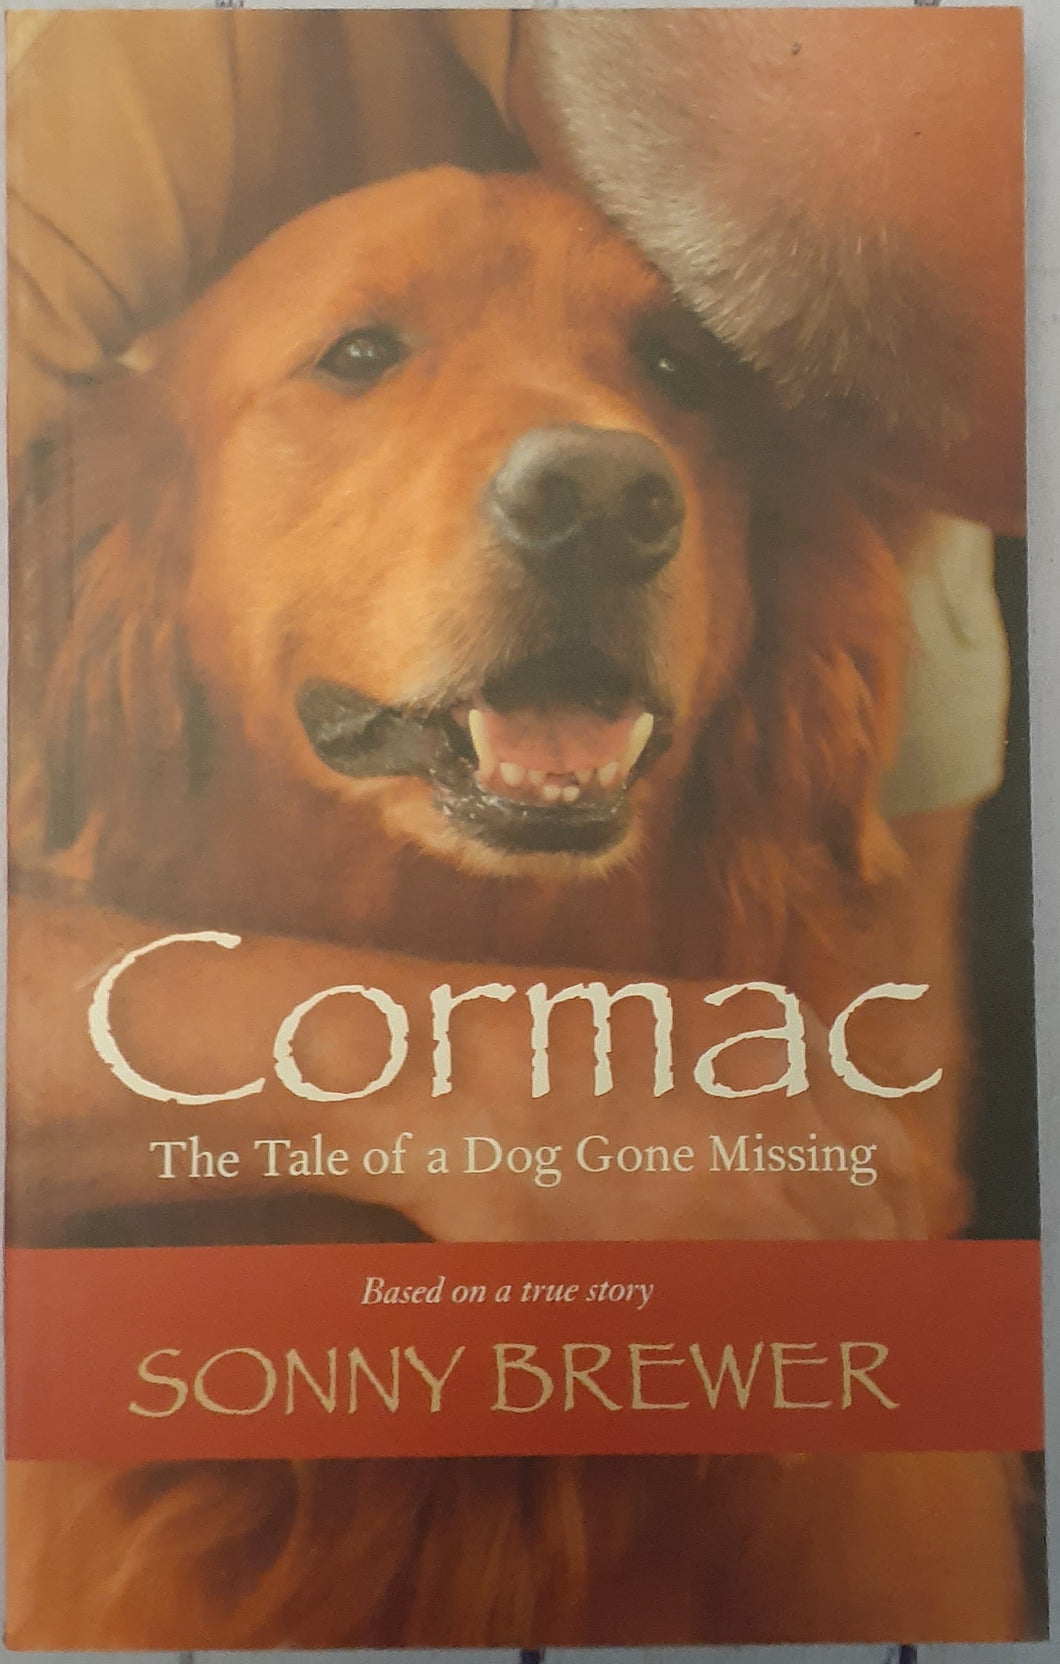 Cormac - A Tale of a Dog Gone Missing